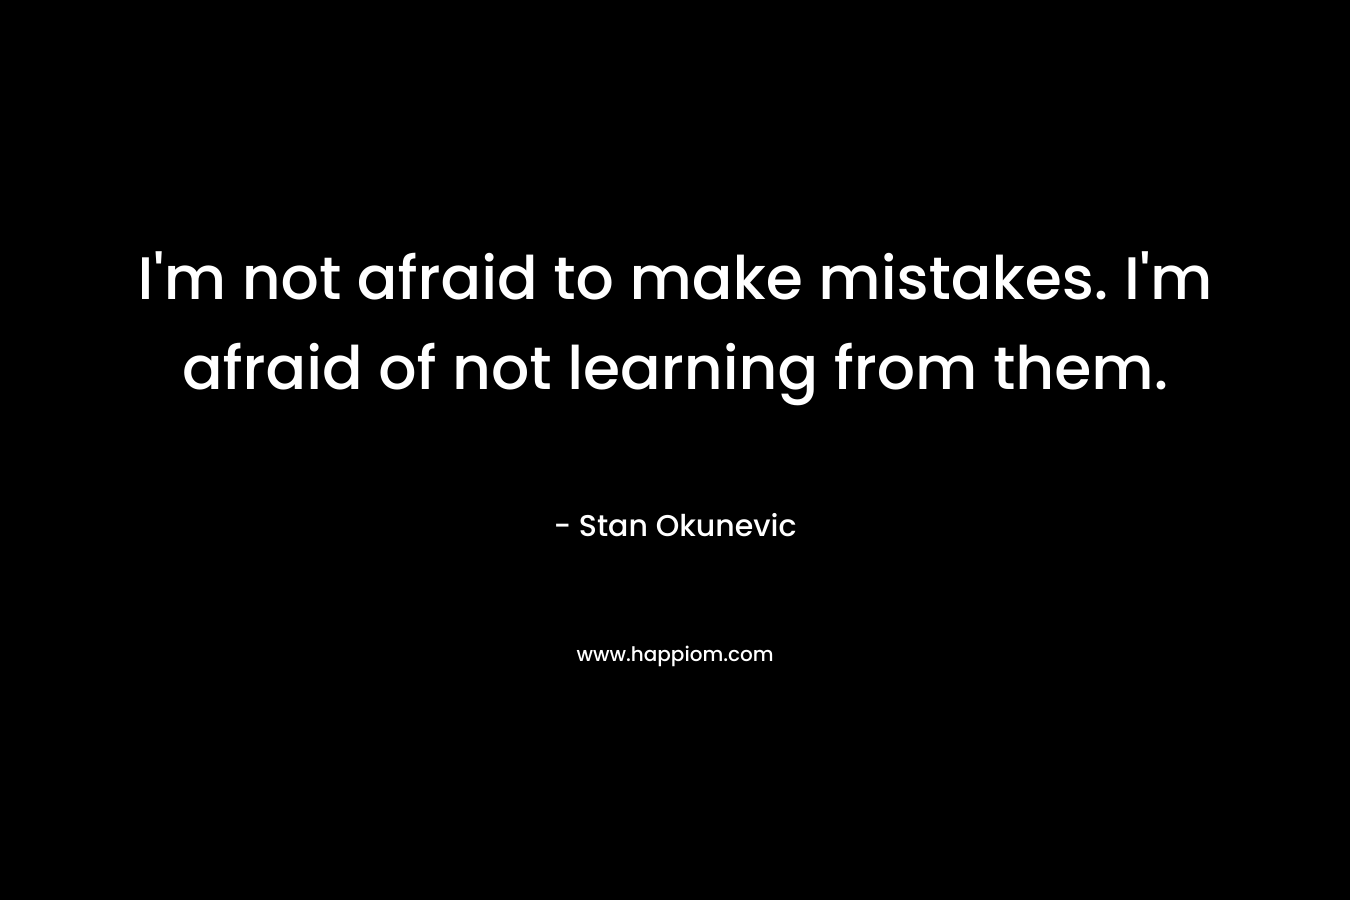 I’m not afraid to make mistakes. I’m afraid of not learning from them. – Stan Okunevic